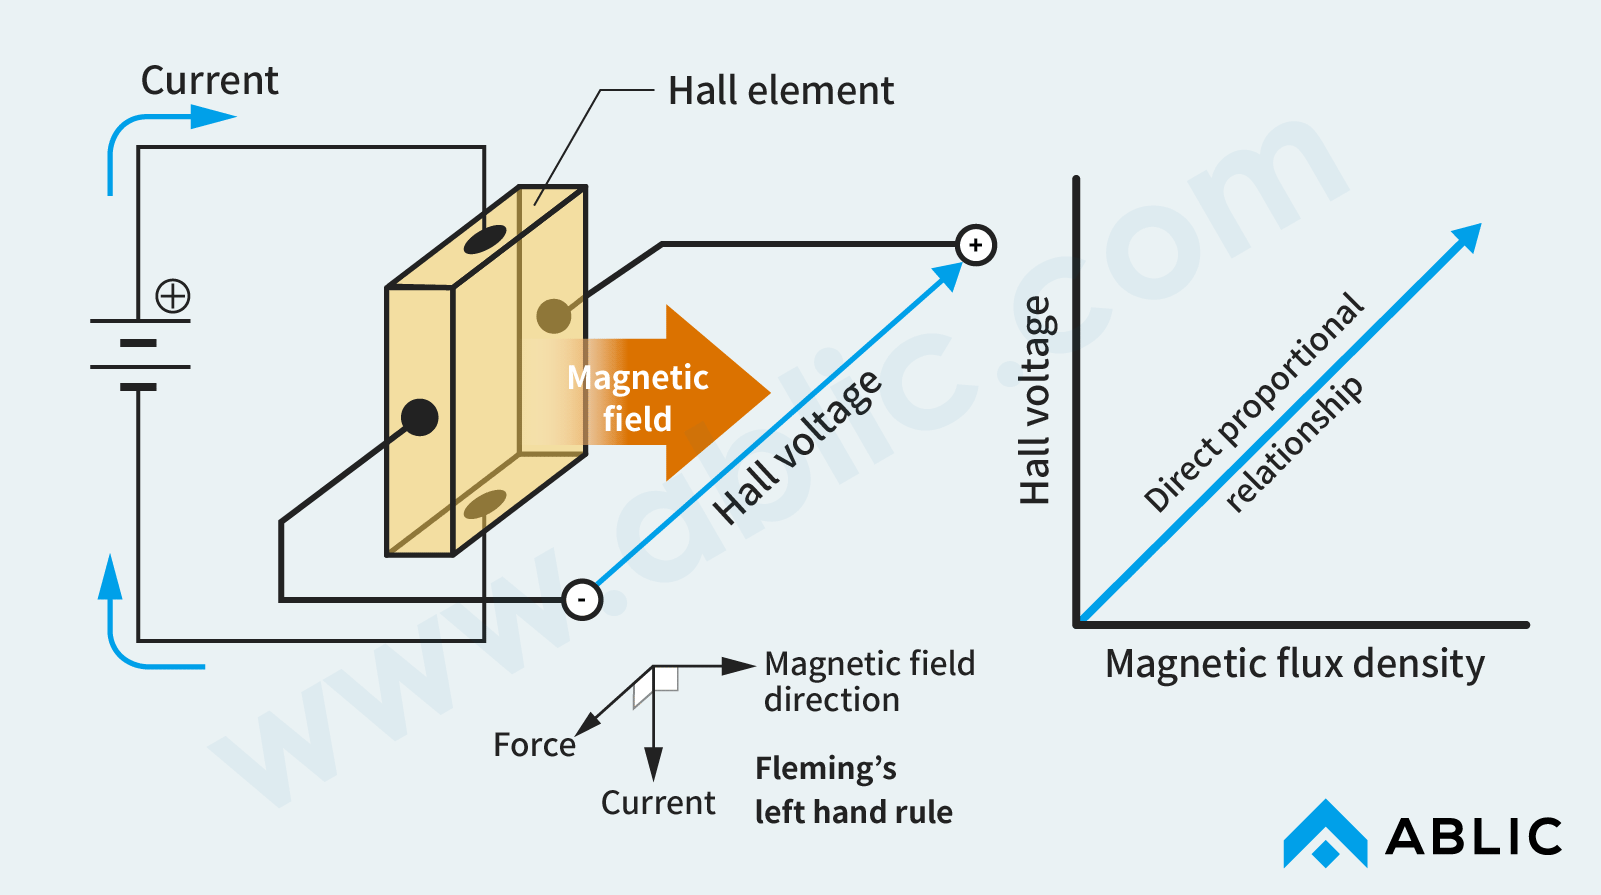 Operating principle of a Hall element